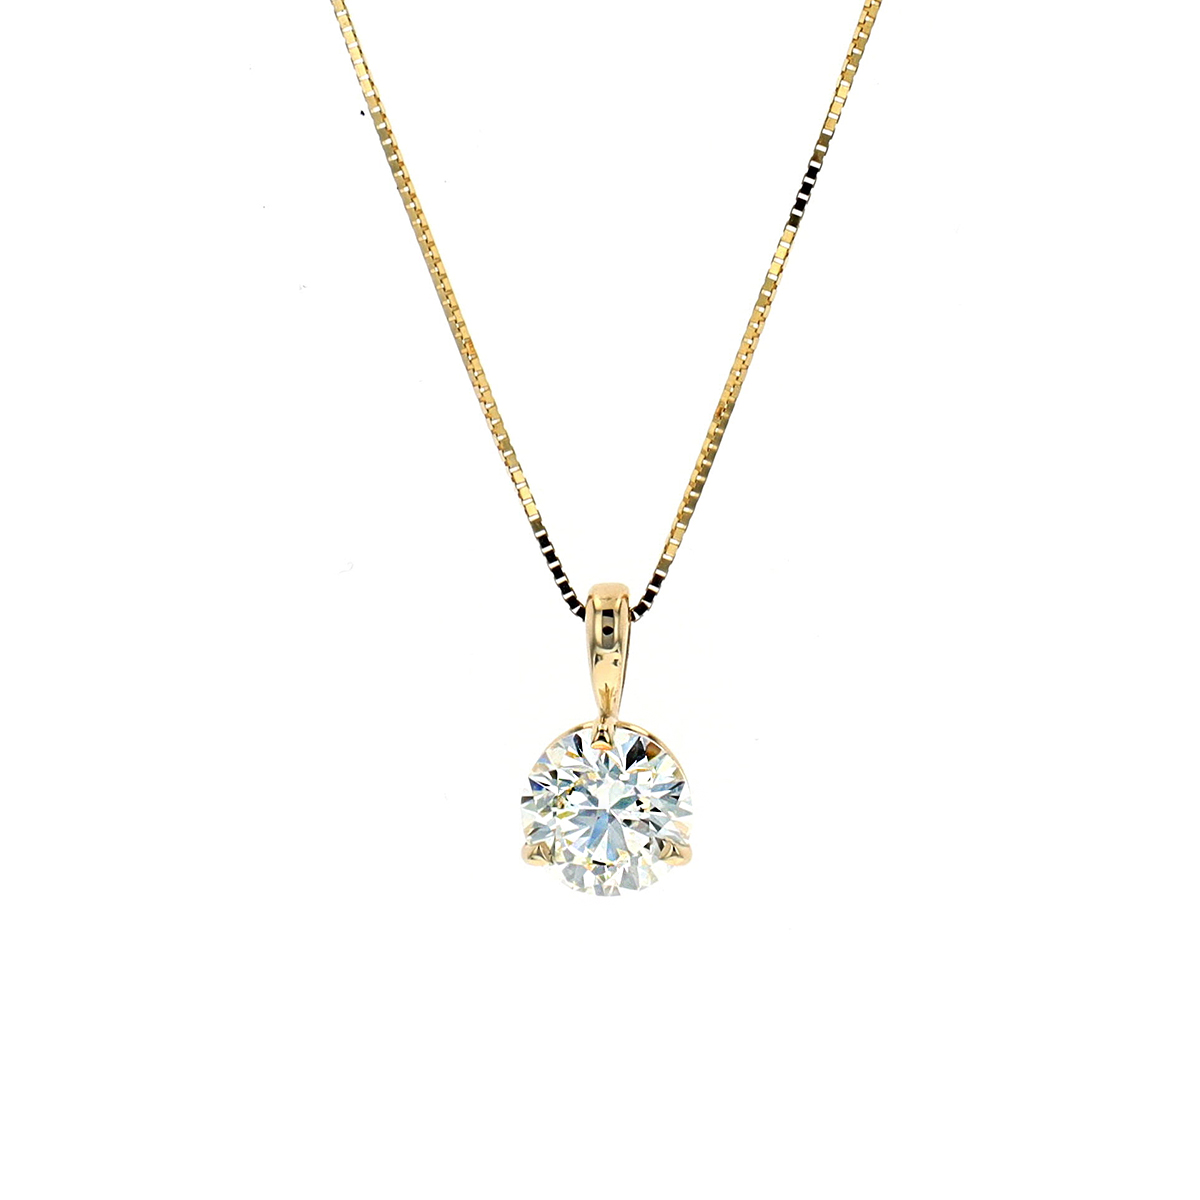 14K Yellow Gold Diamond Solitaire Pendant with Chain